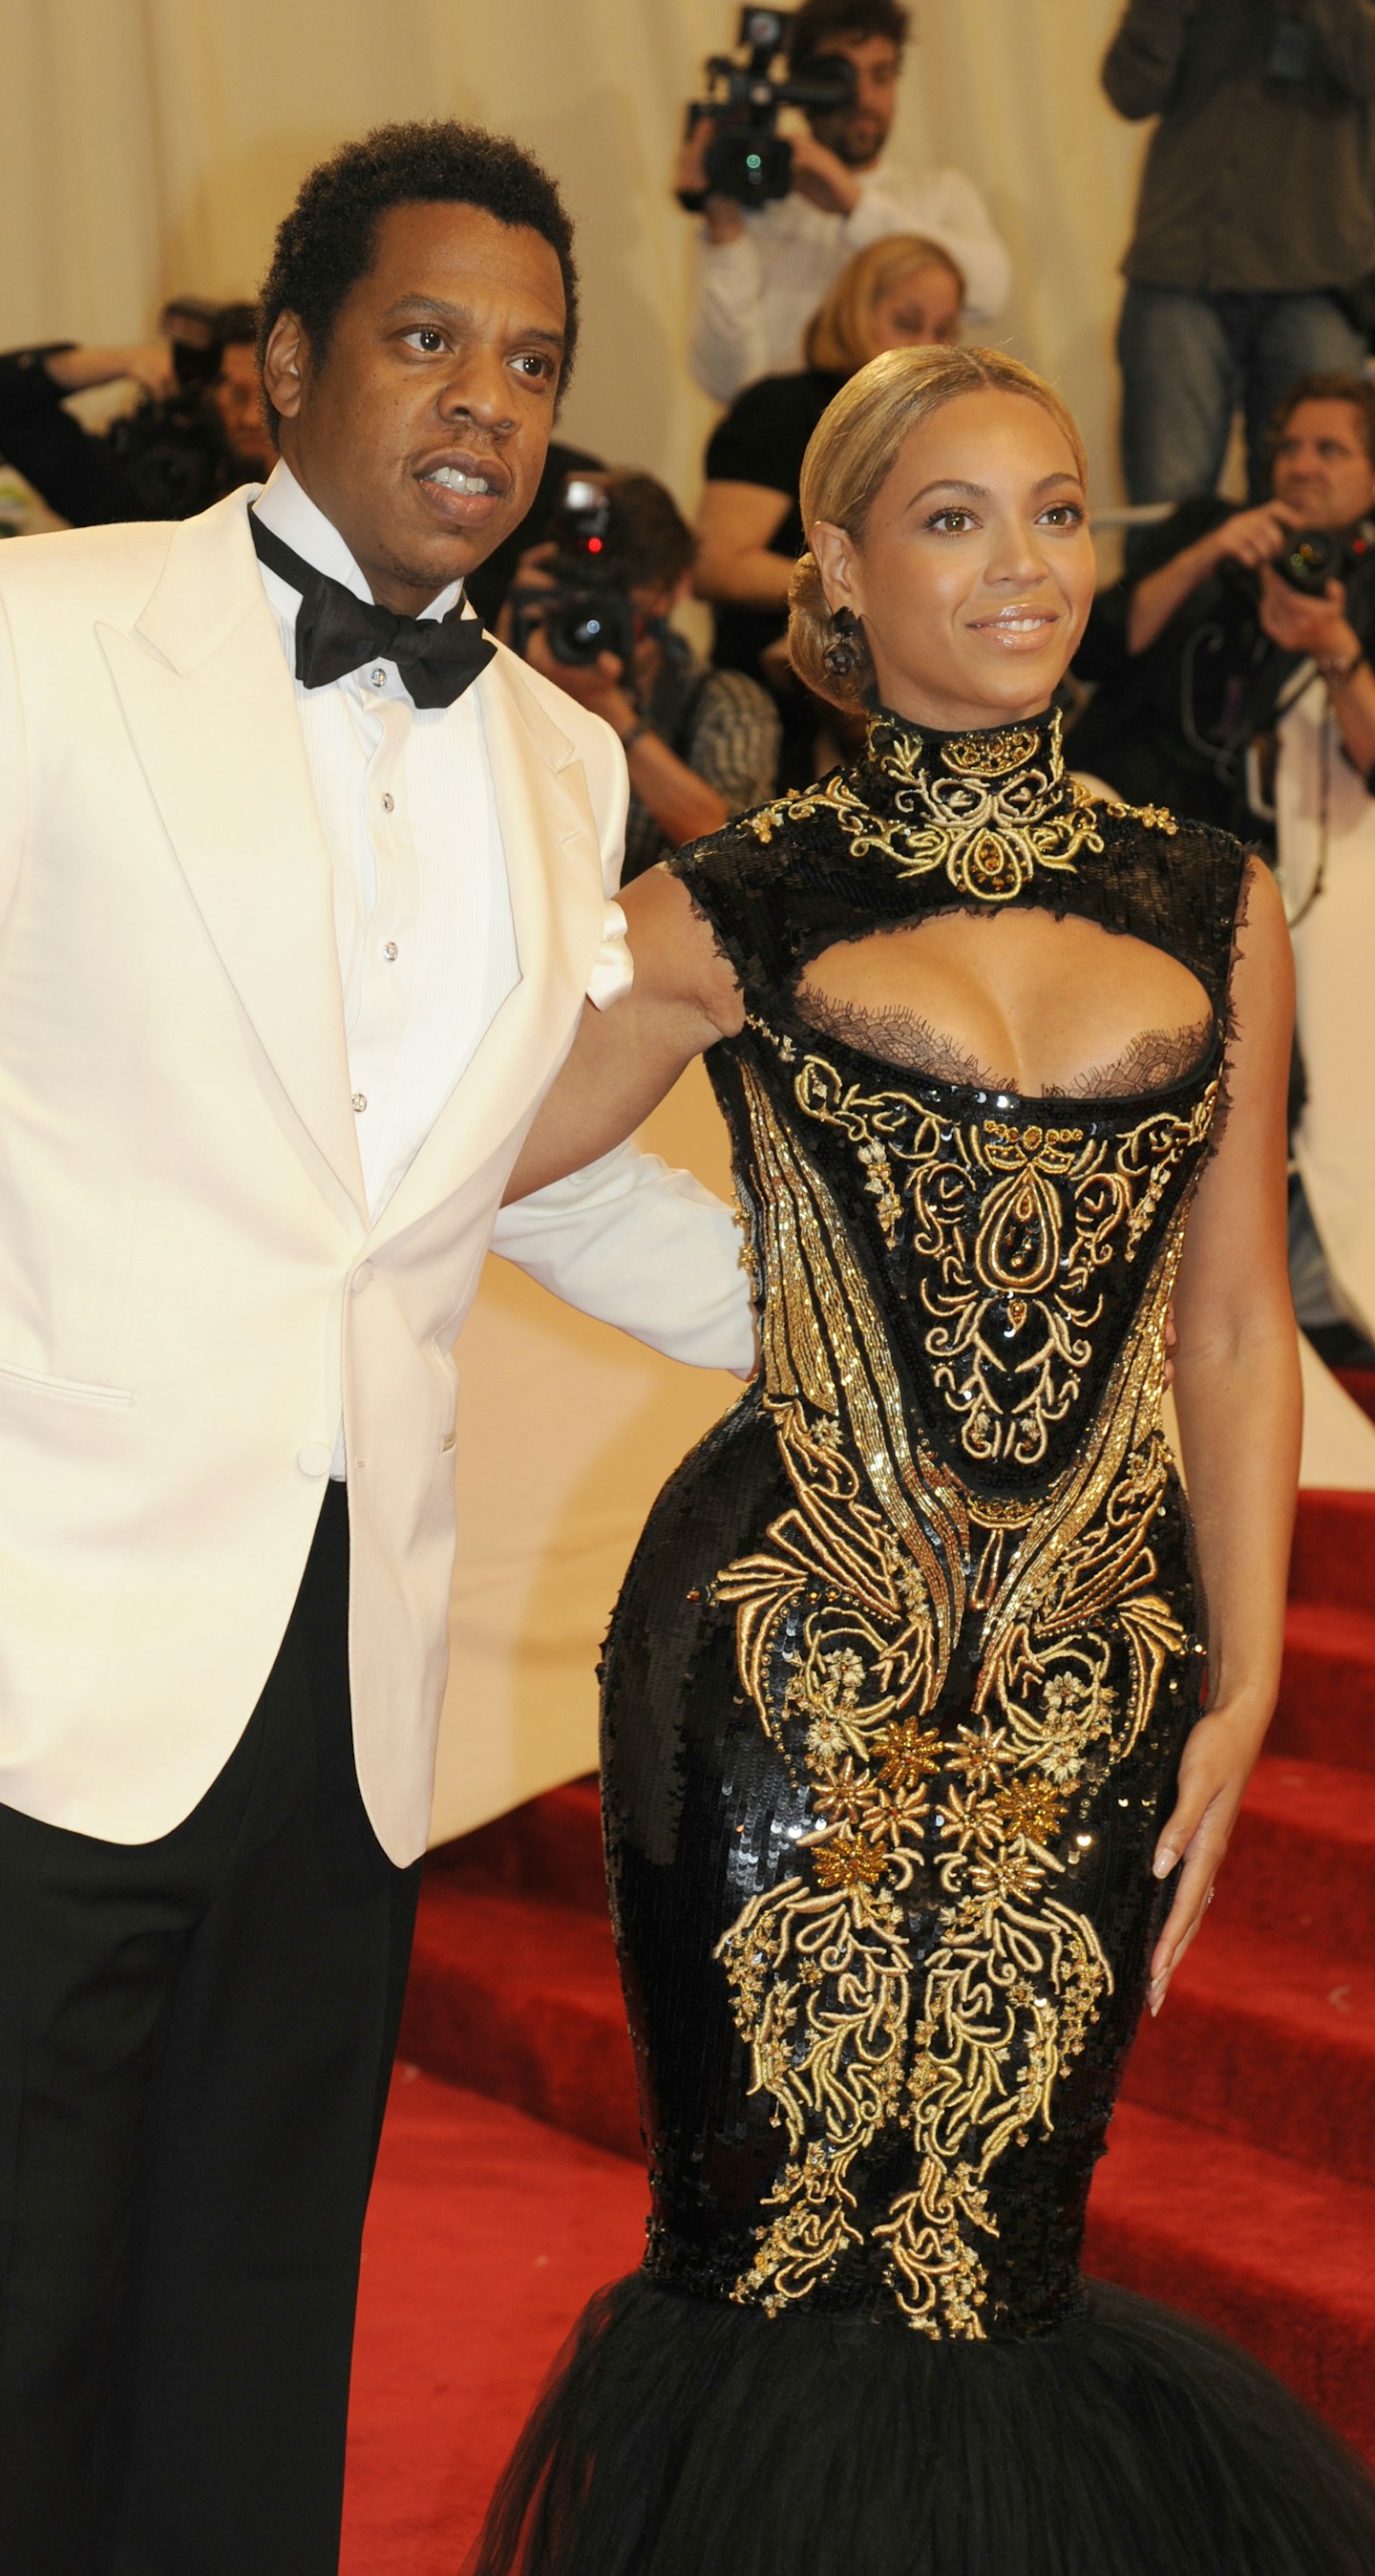 Jay-Z and Beyonce Knowles attend "Alexander McQueen: Savage Beauty" Costume Institute Gala, 20101, at Metropolitan Museum of Art in New York City.